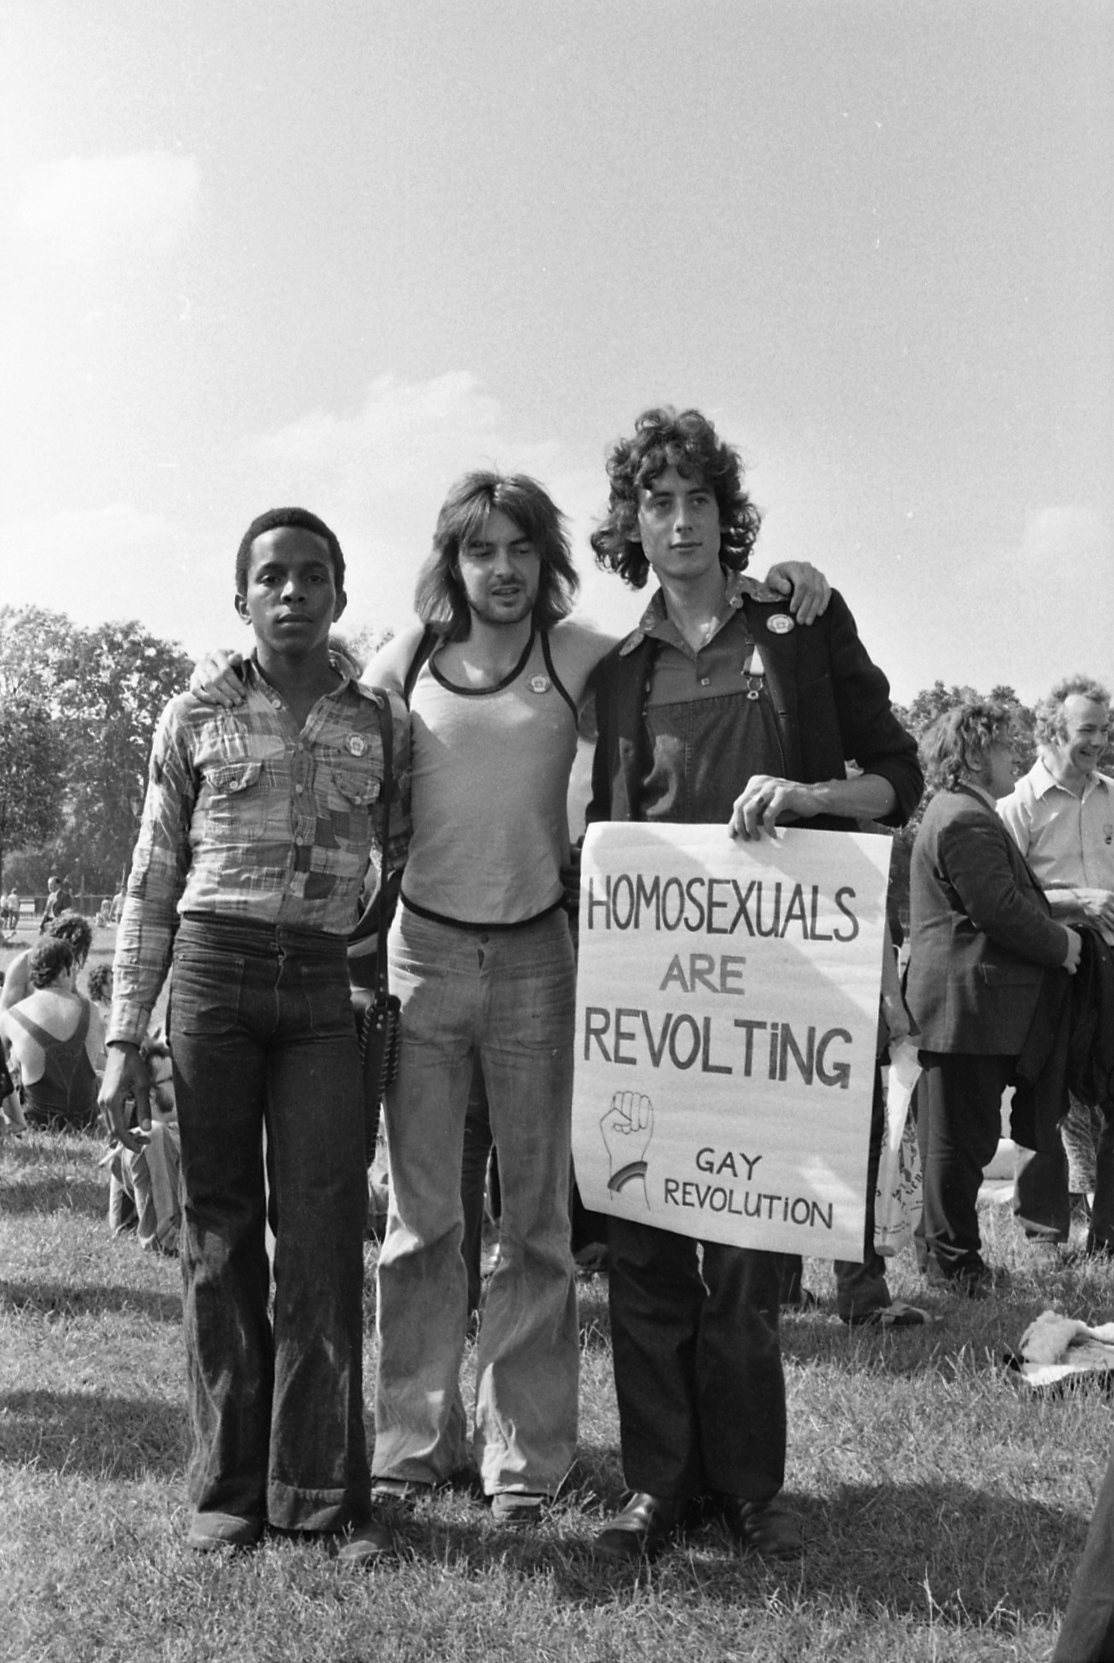 Ted Brown, Noel Glyn and Peter Tatchell at a GLF event in 1973.